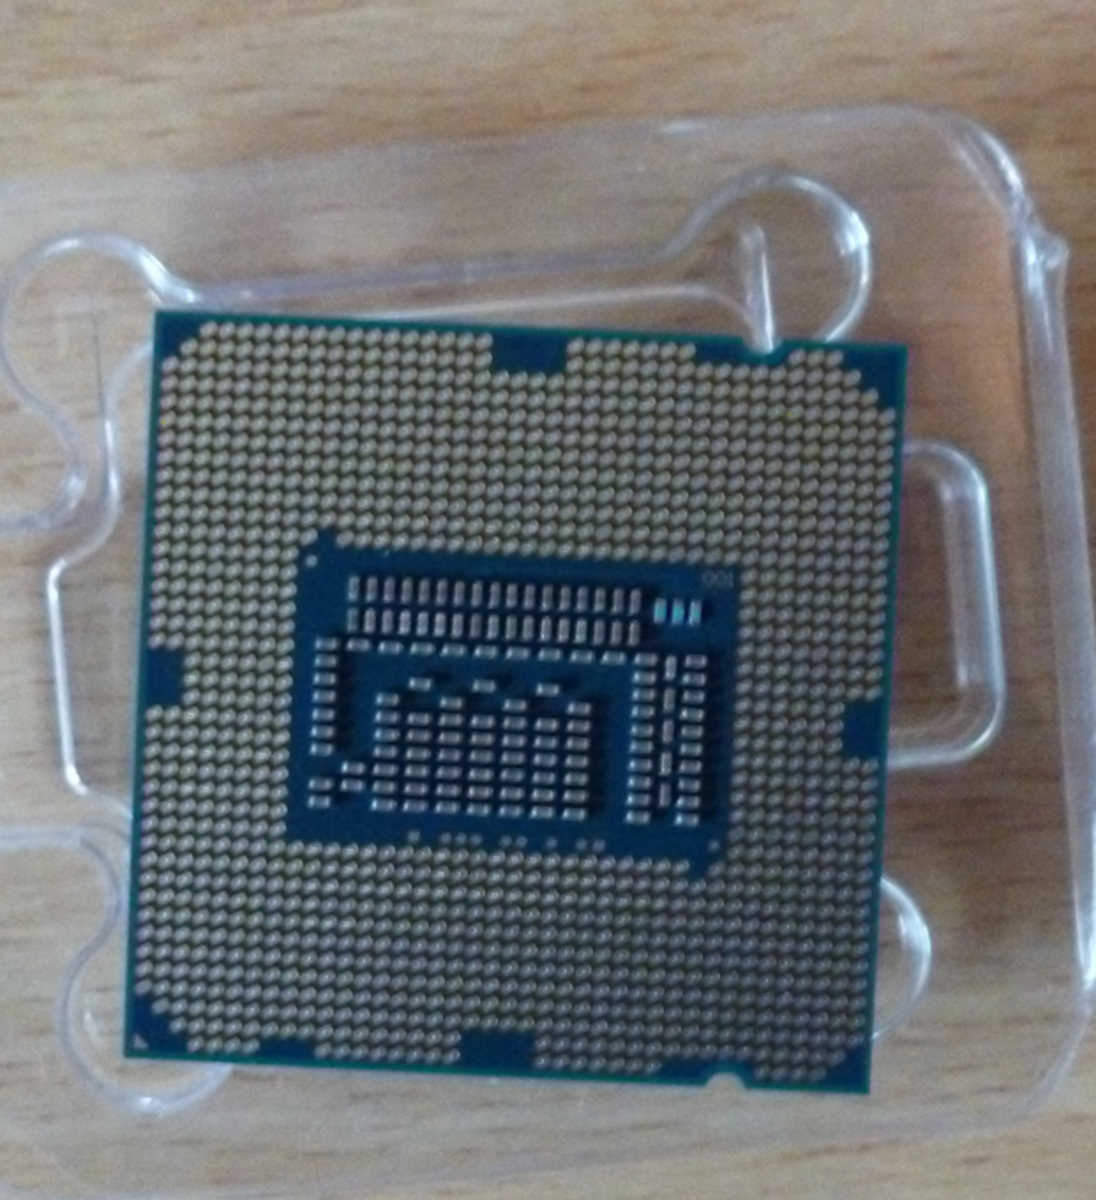 The newest generation Intel Core i5 processor.  This tiny chip is the 'brain' of your computer.